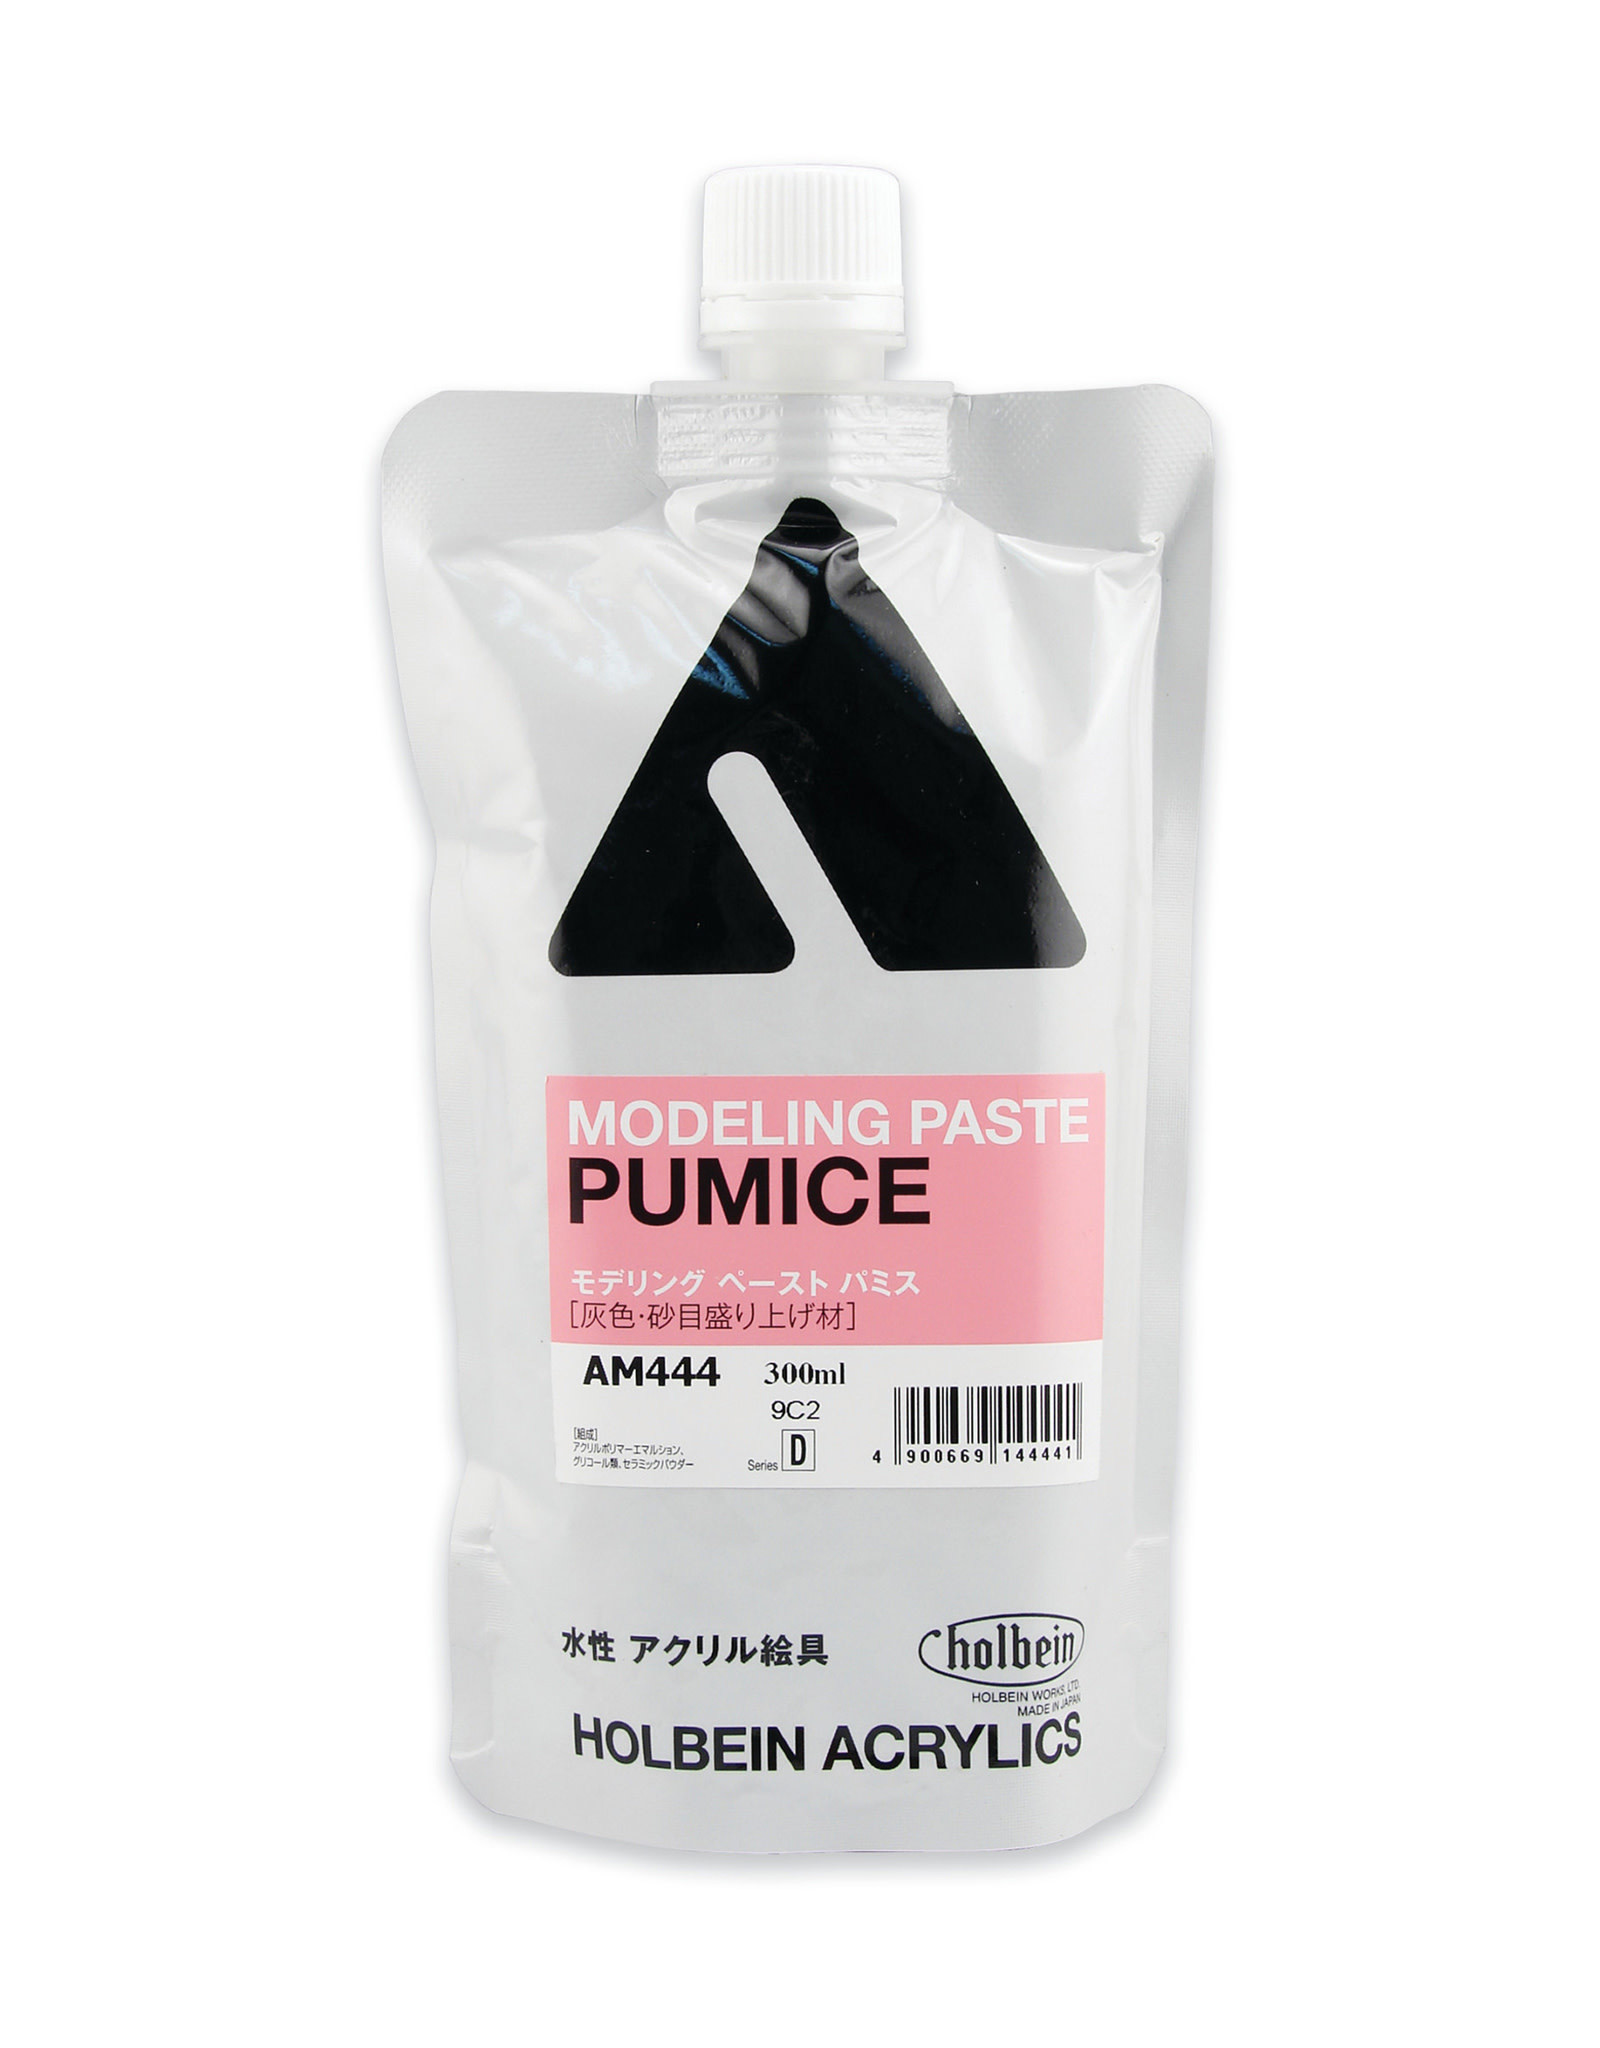 HOLBEIN Holbein Acrylic Modeling Paste, Pumice